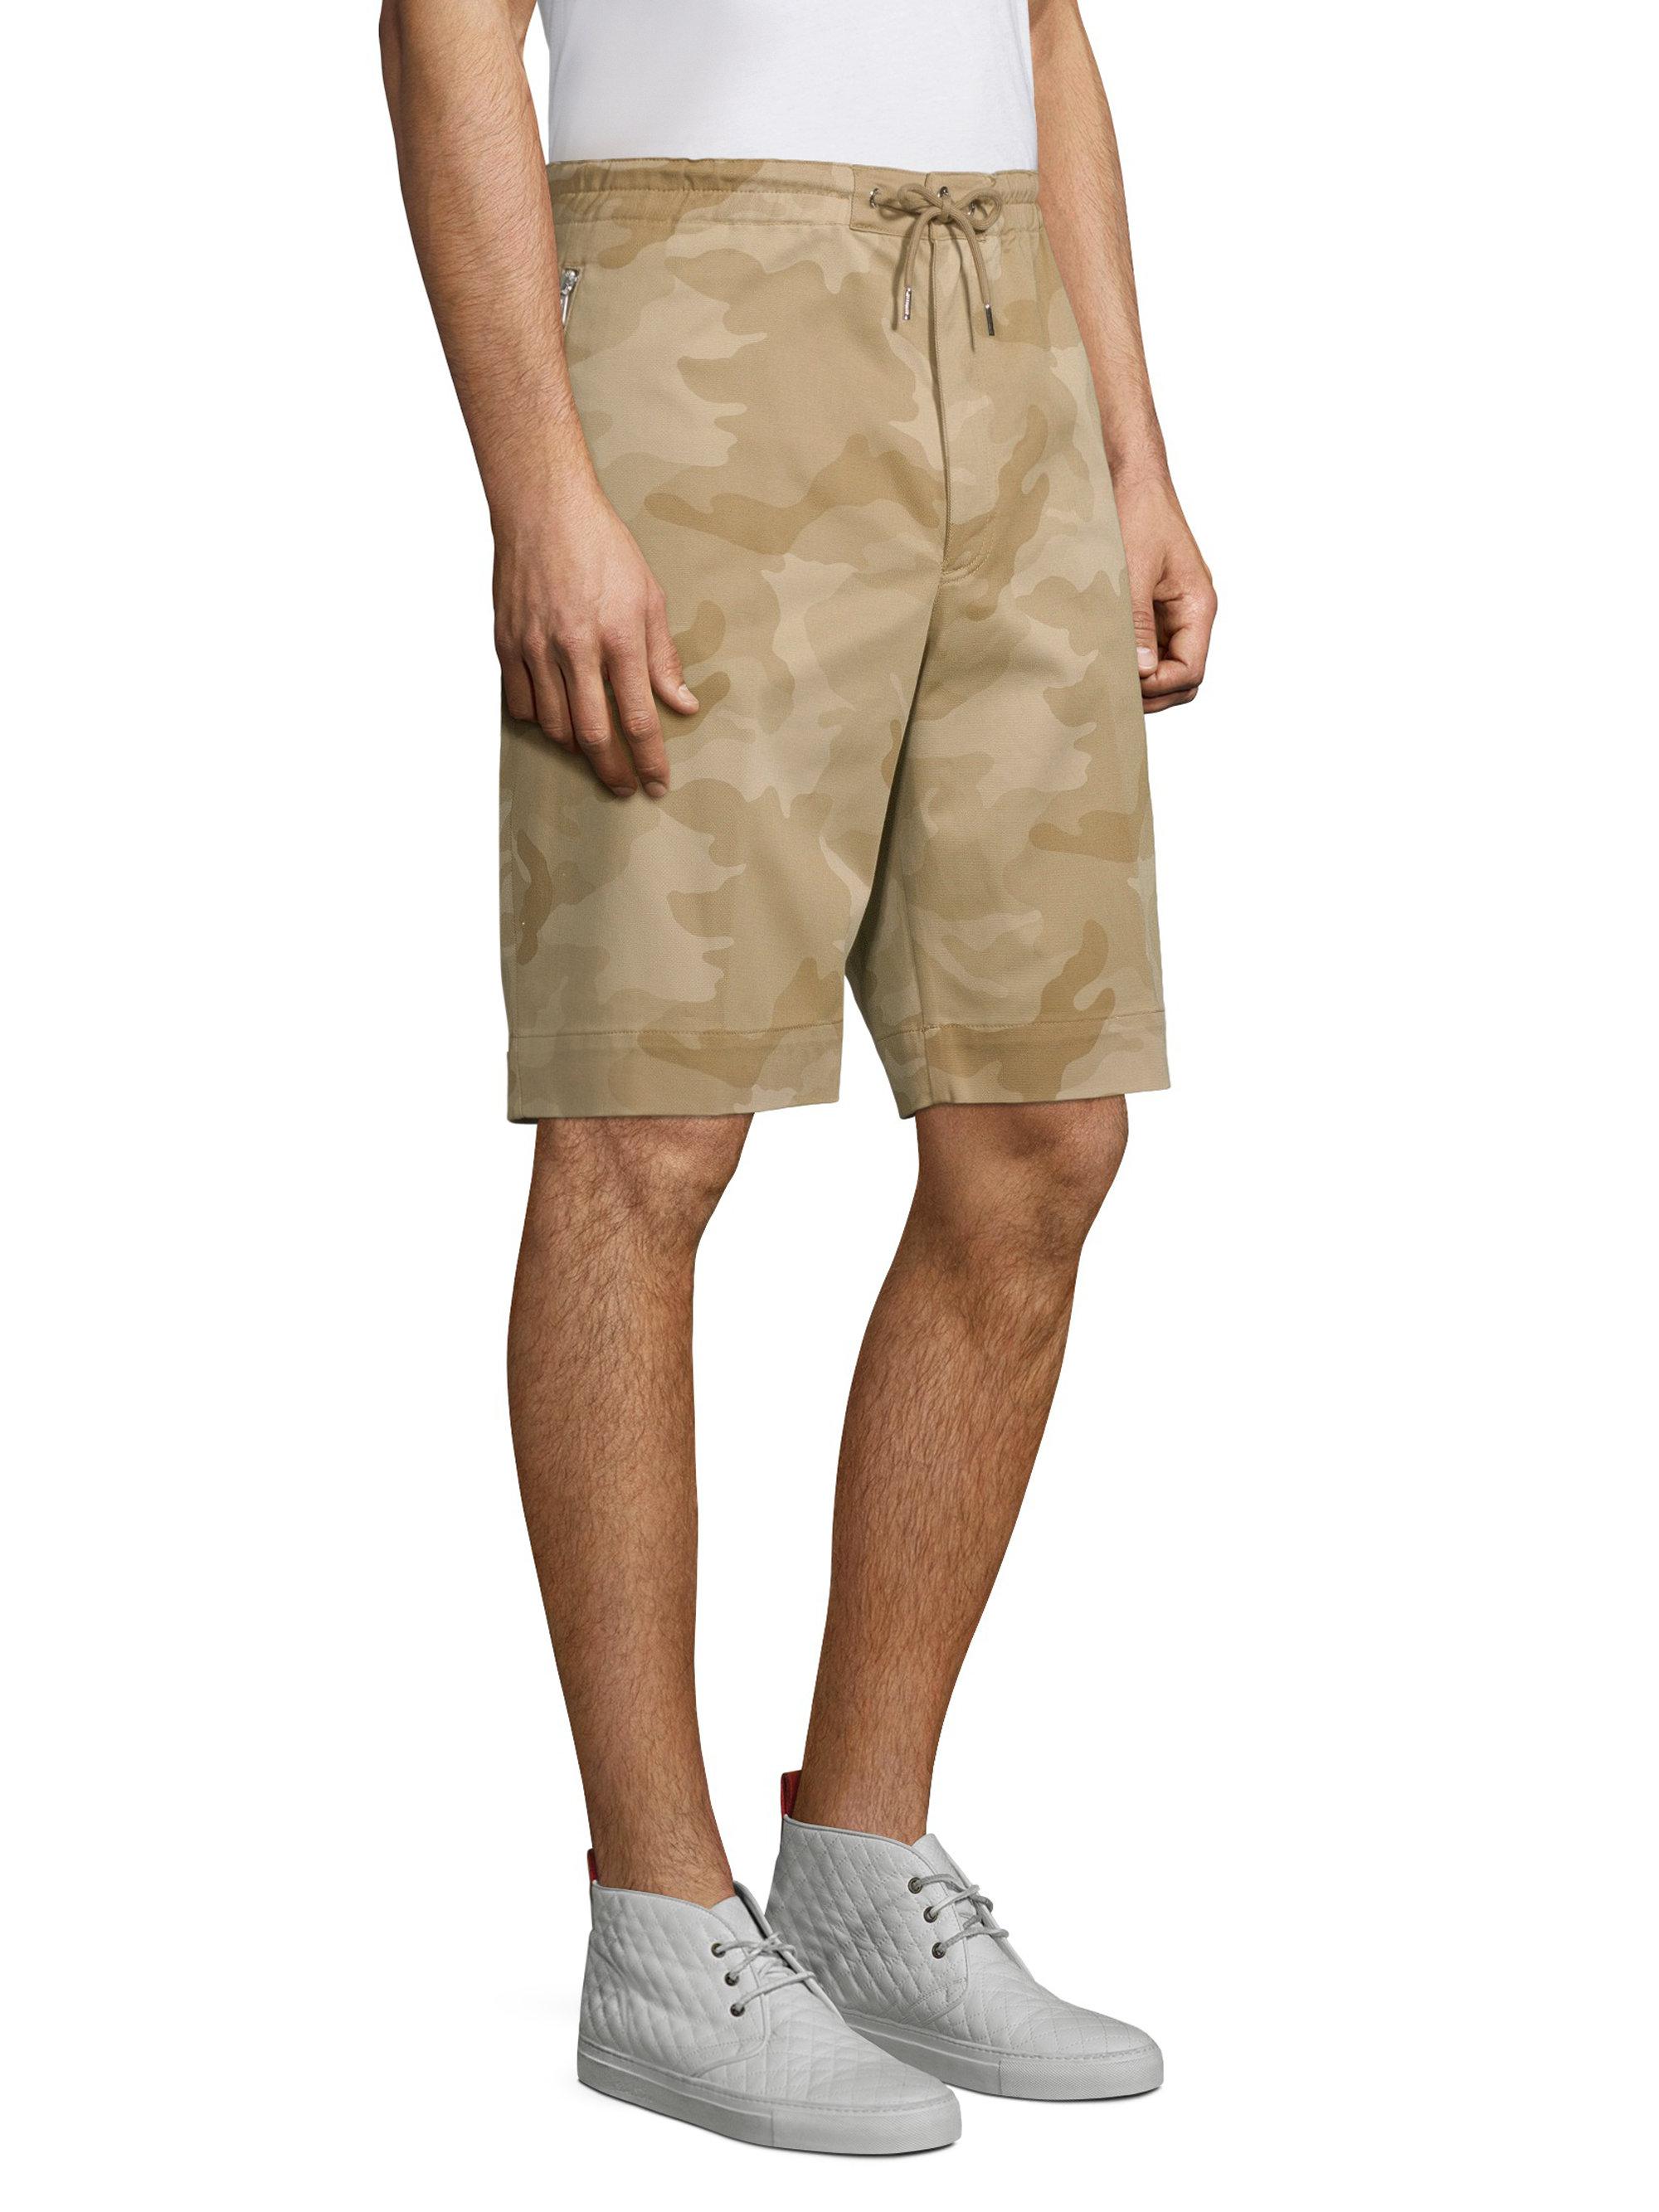 Moncler Cotton Camouflage Bermuda Shorts in Camel (Natural) for Men - Lyst